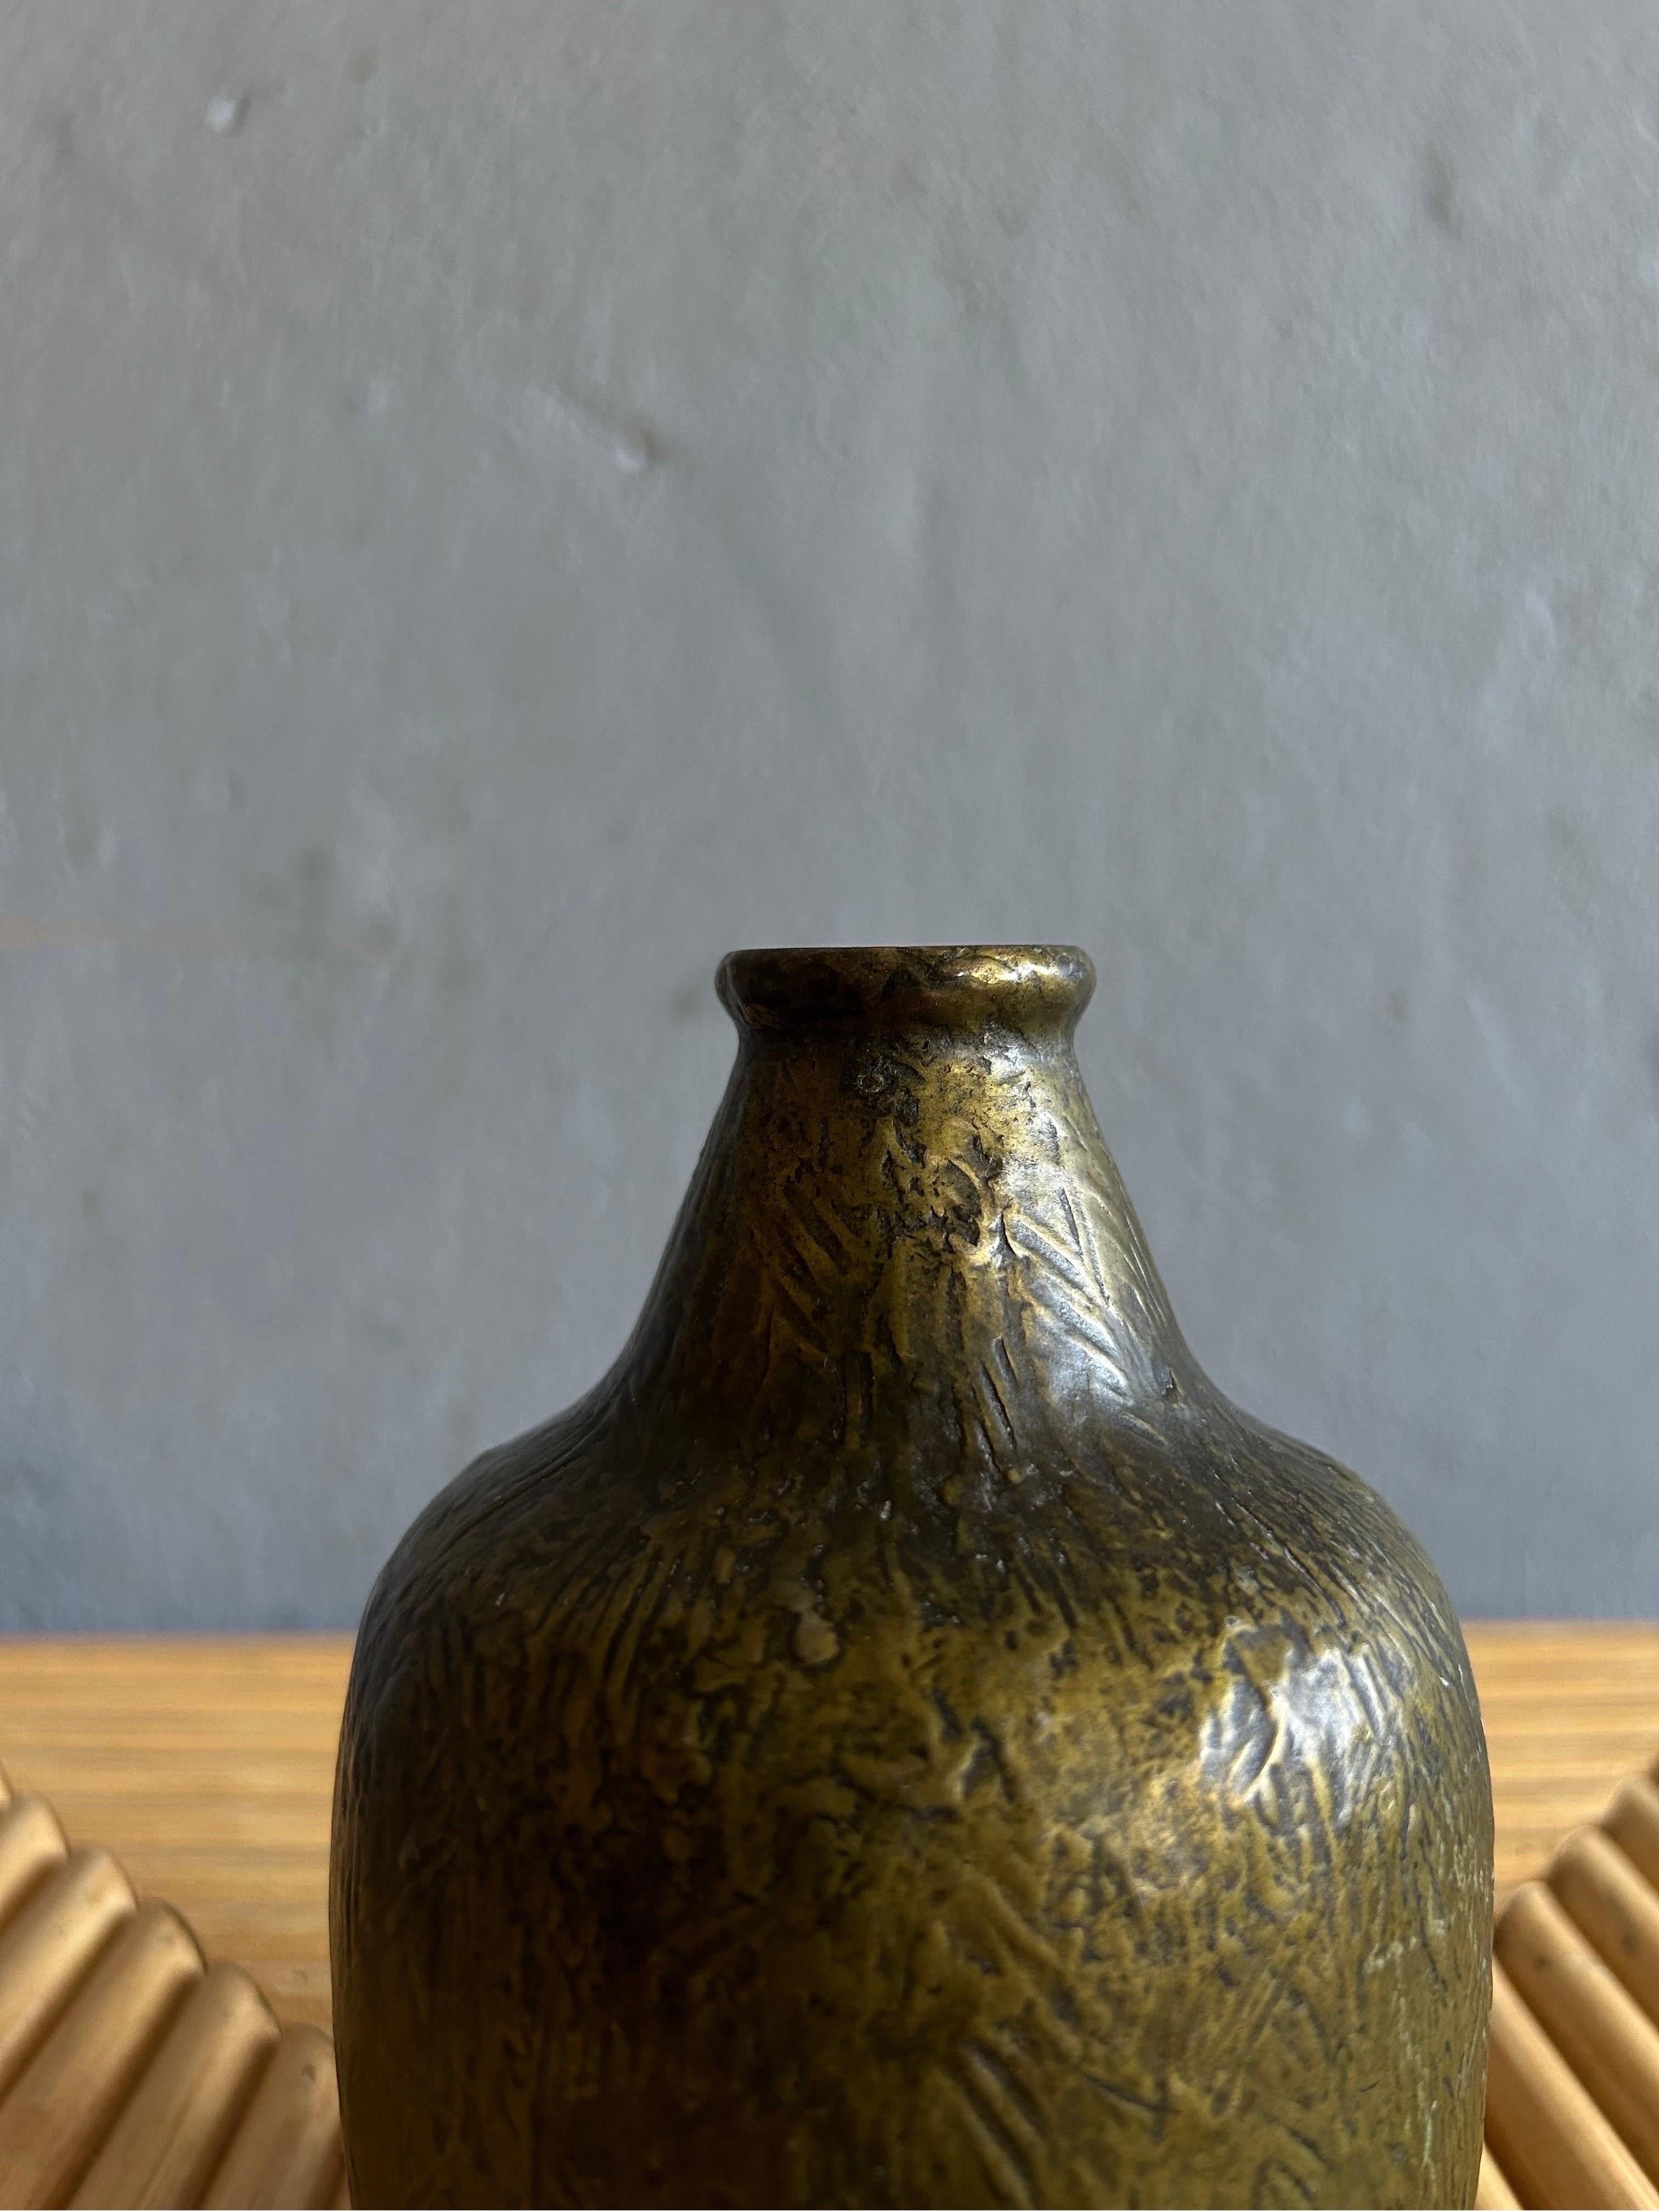 Rare bronze vase attributed Evan Jensen made in Denmark in the 1930s.
The vase is made by a unknown danish caster called Antika but is a typical Evan Jensen shaped vase and has typical Evan Jensen detail.

The vase is in good condition with a